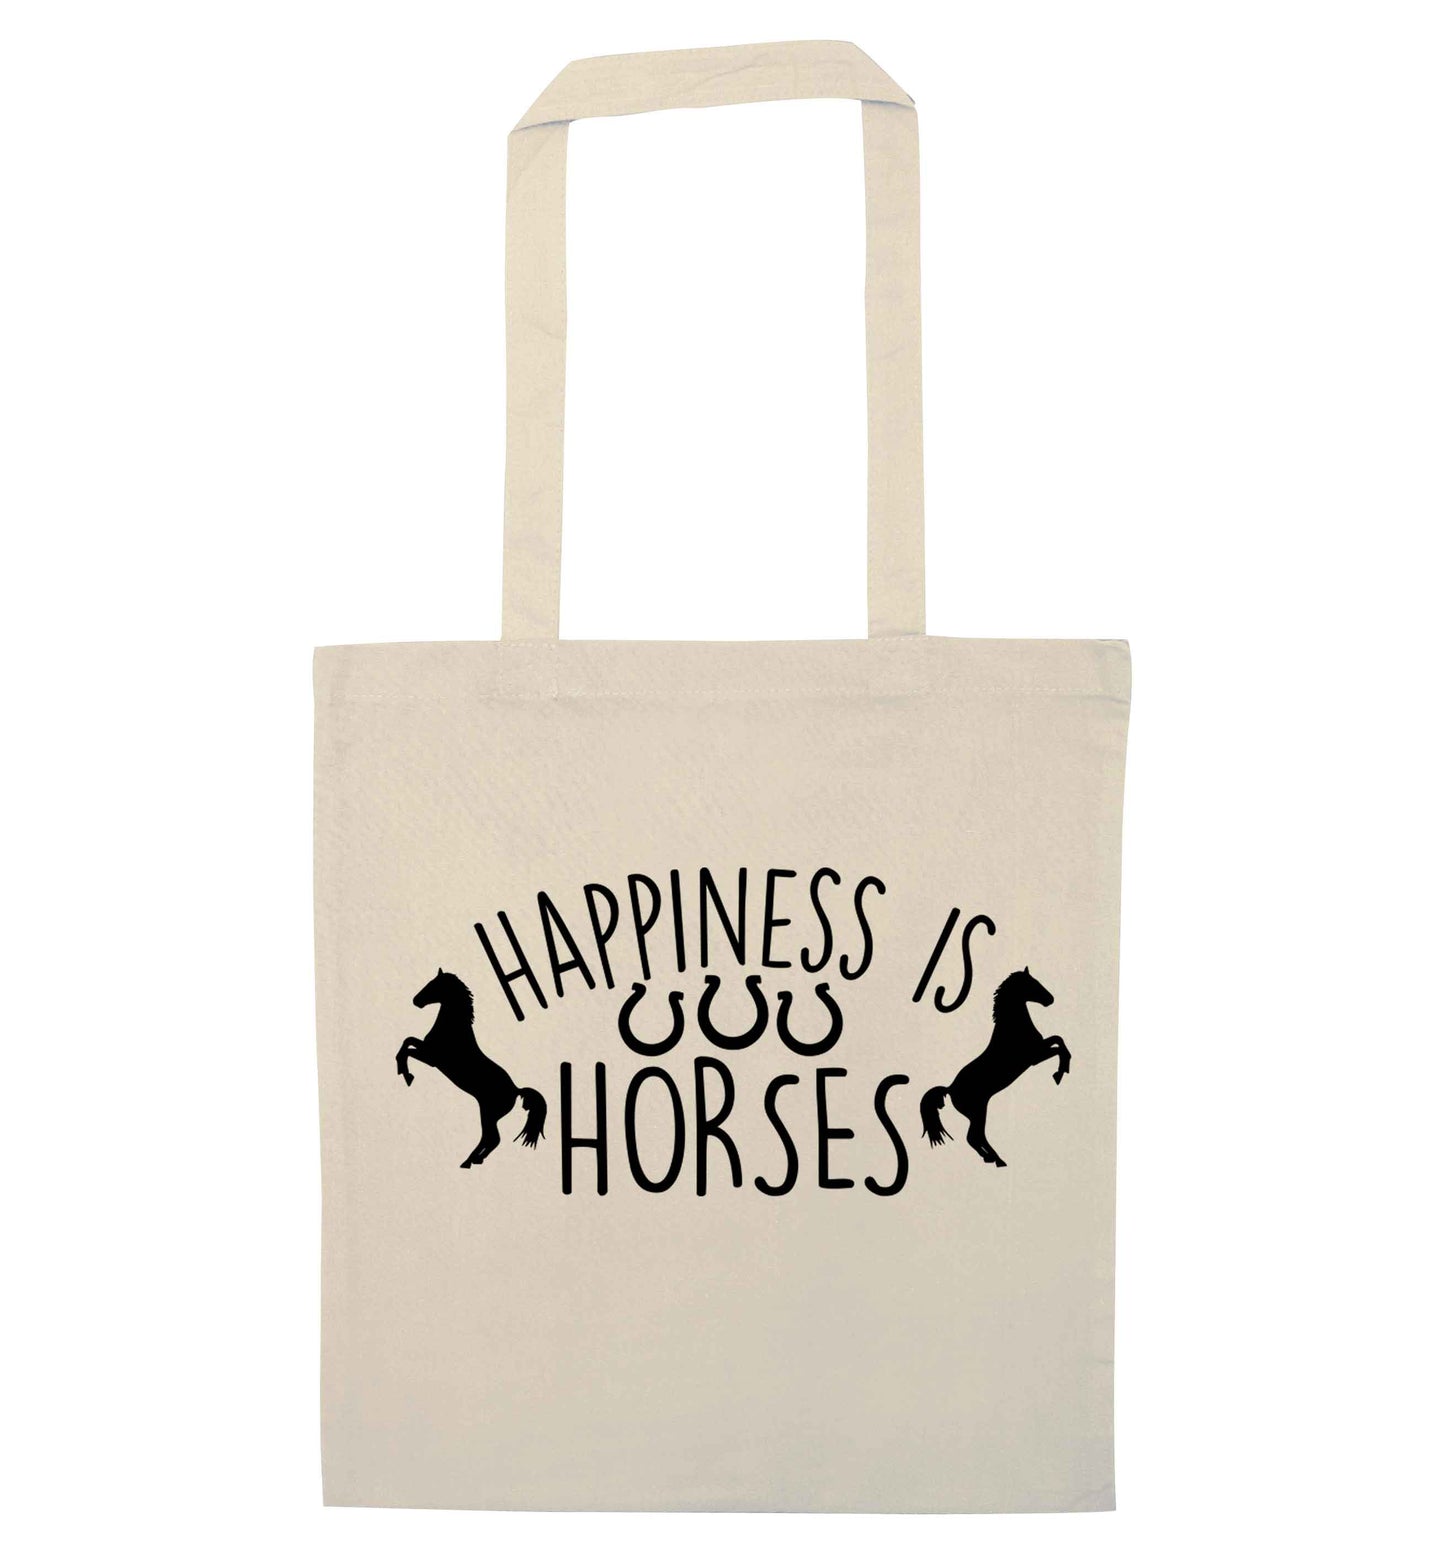 Happiness is horses natural tote bag